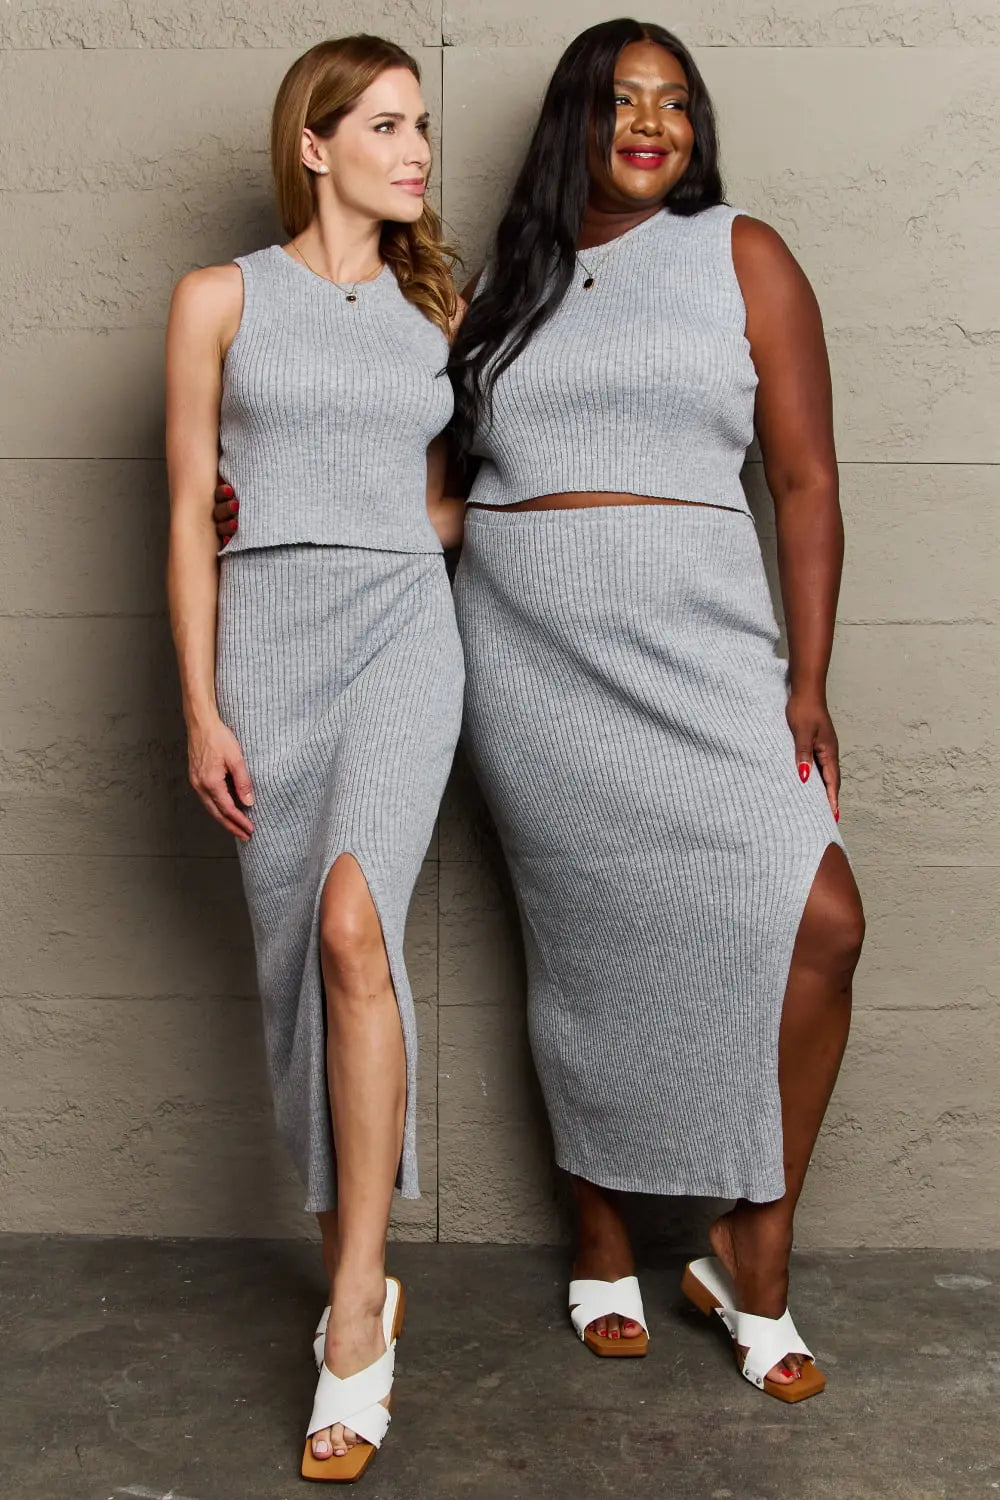 Charcoal Gray Fitted Two-Piece Skirt Set By Wedeh's fashion - Wedeh's Fashion